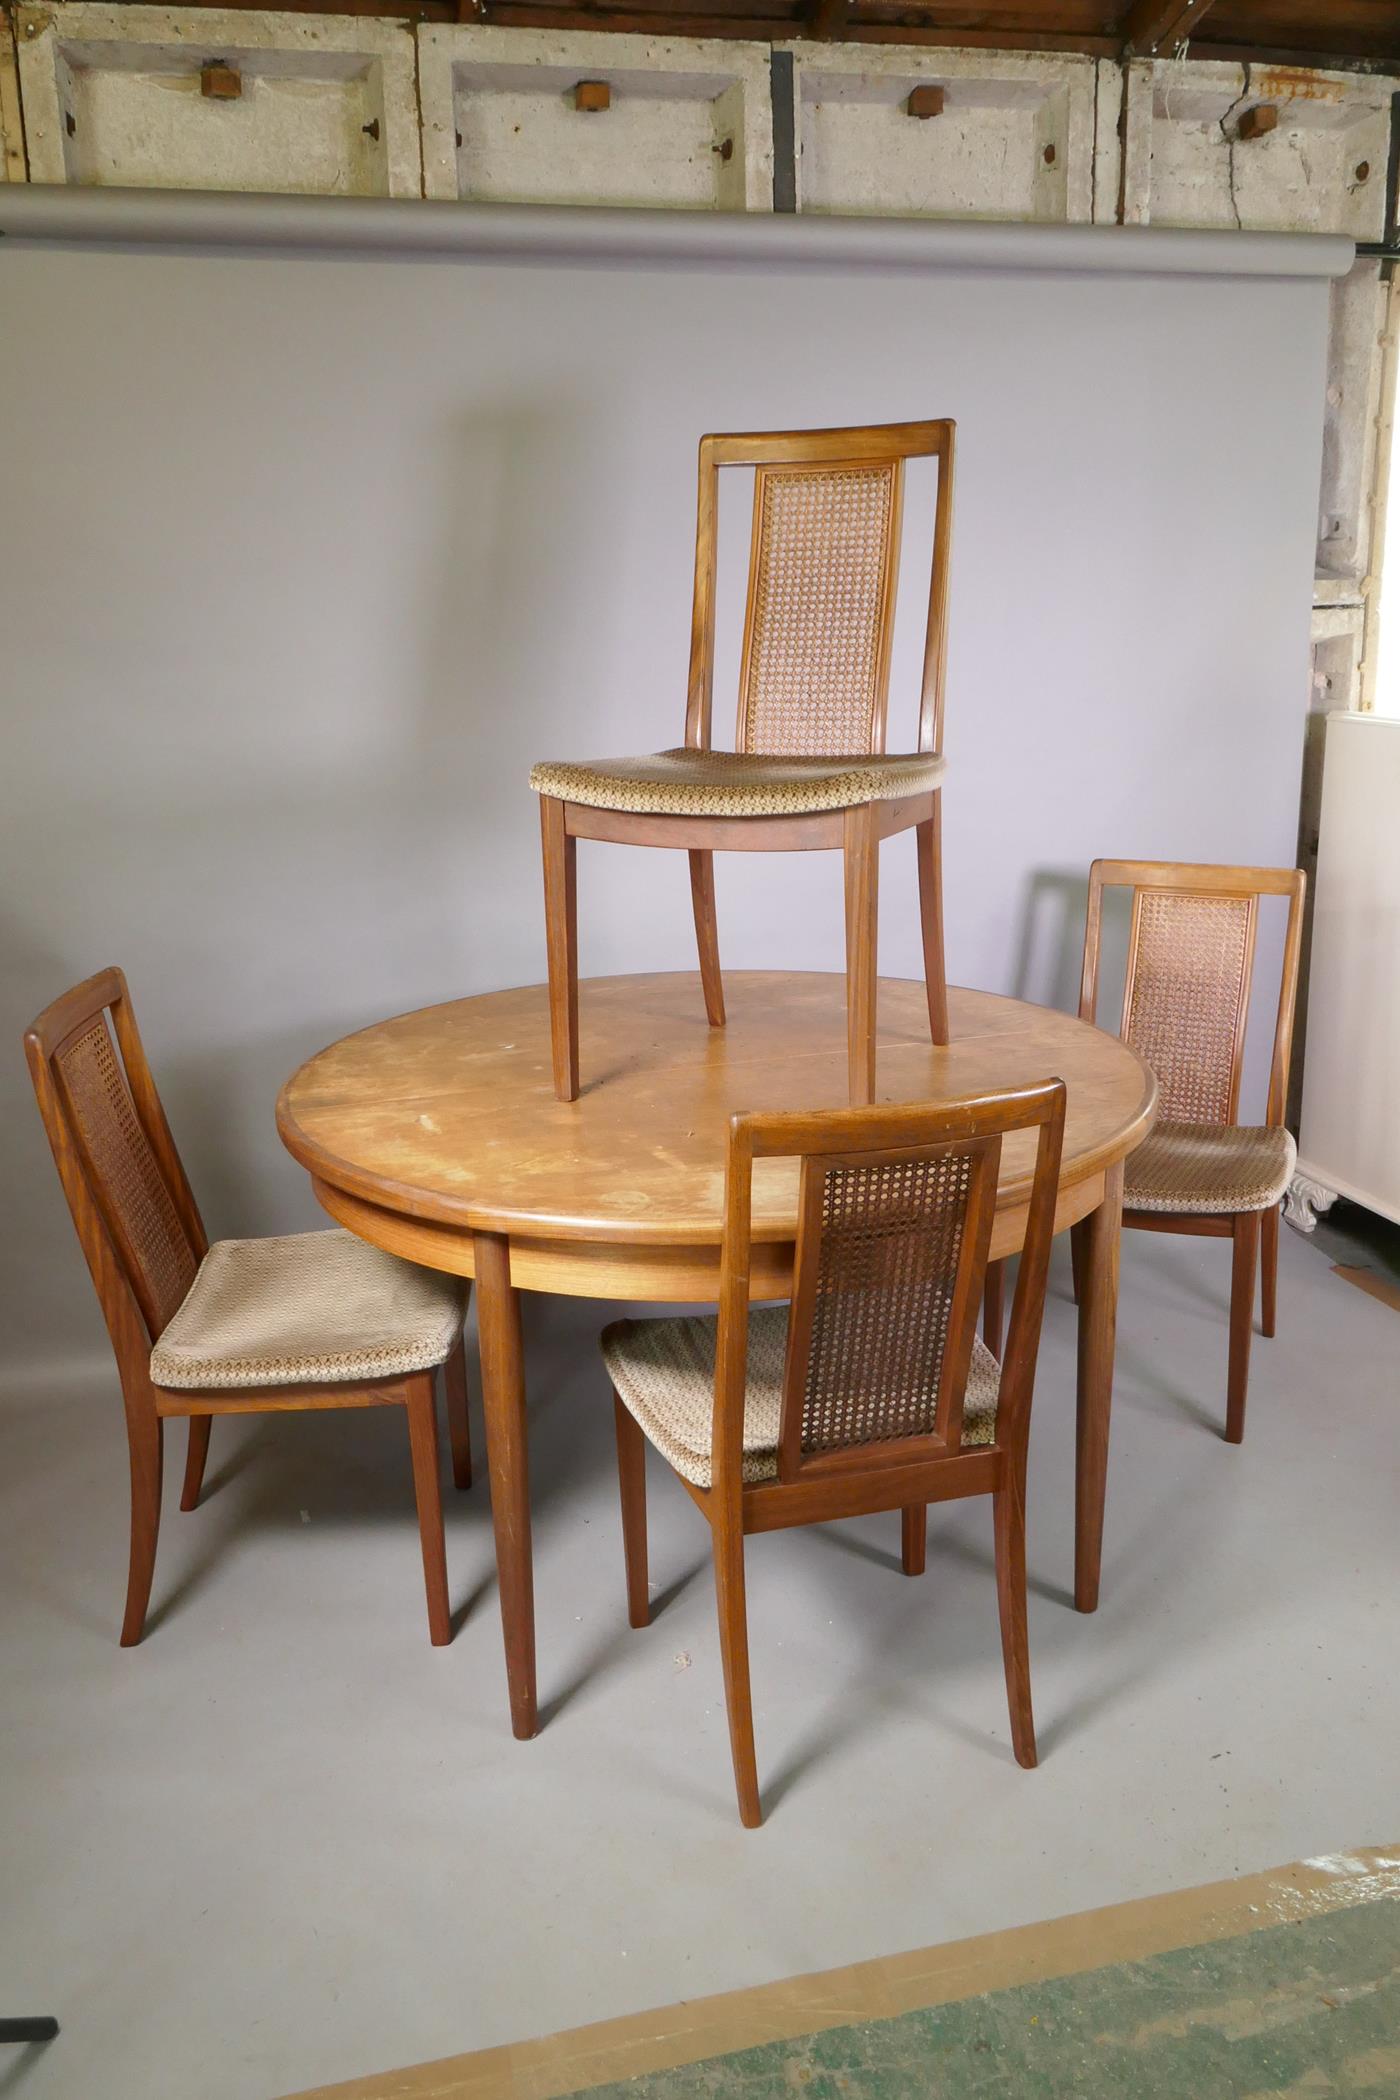 A G-Plan teak dining table with fold out leaf, and four chairs, 1A/F, 48" diameter, 18" leaf - Image 2 of 5